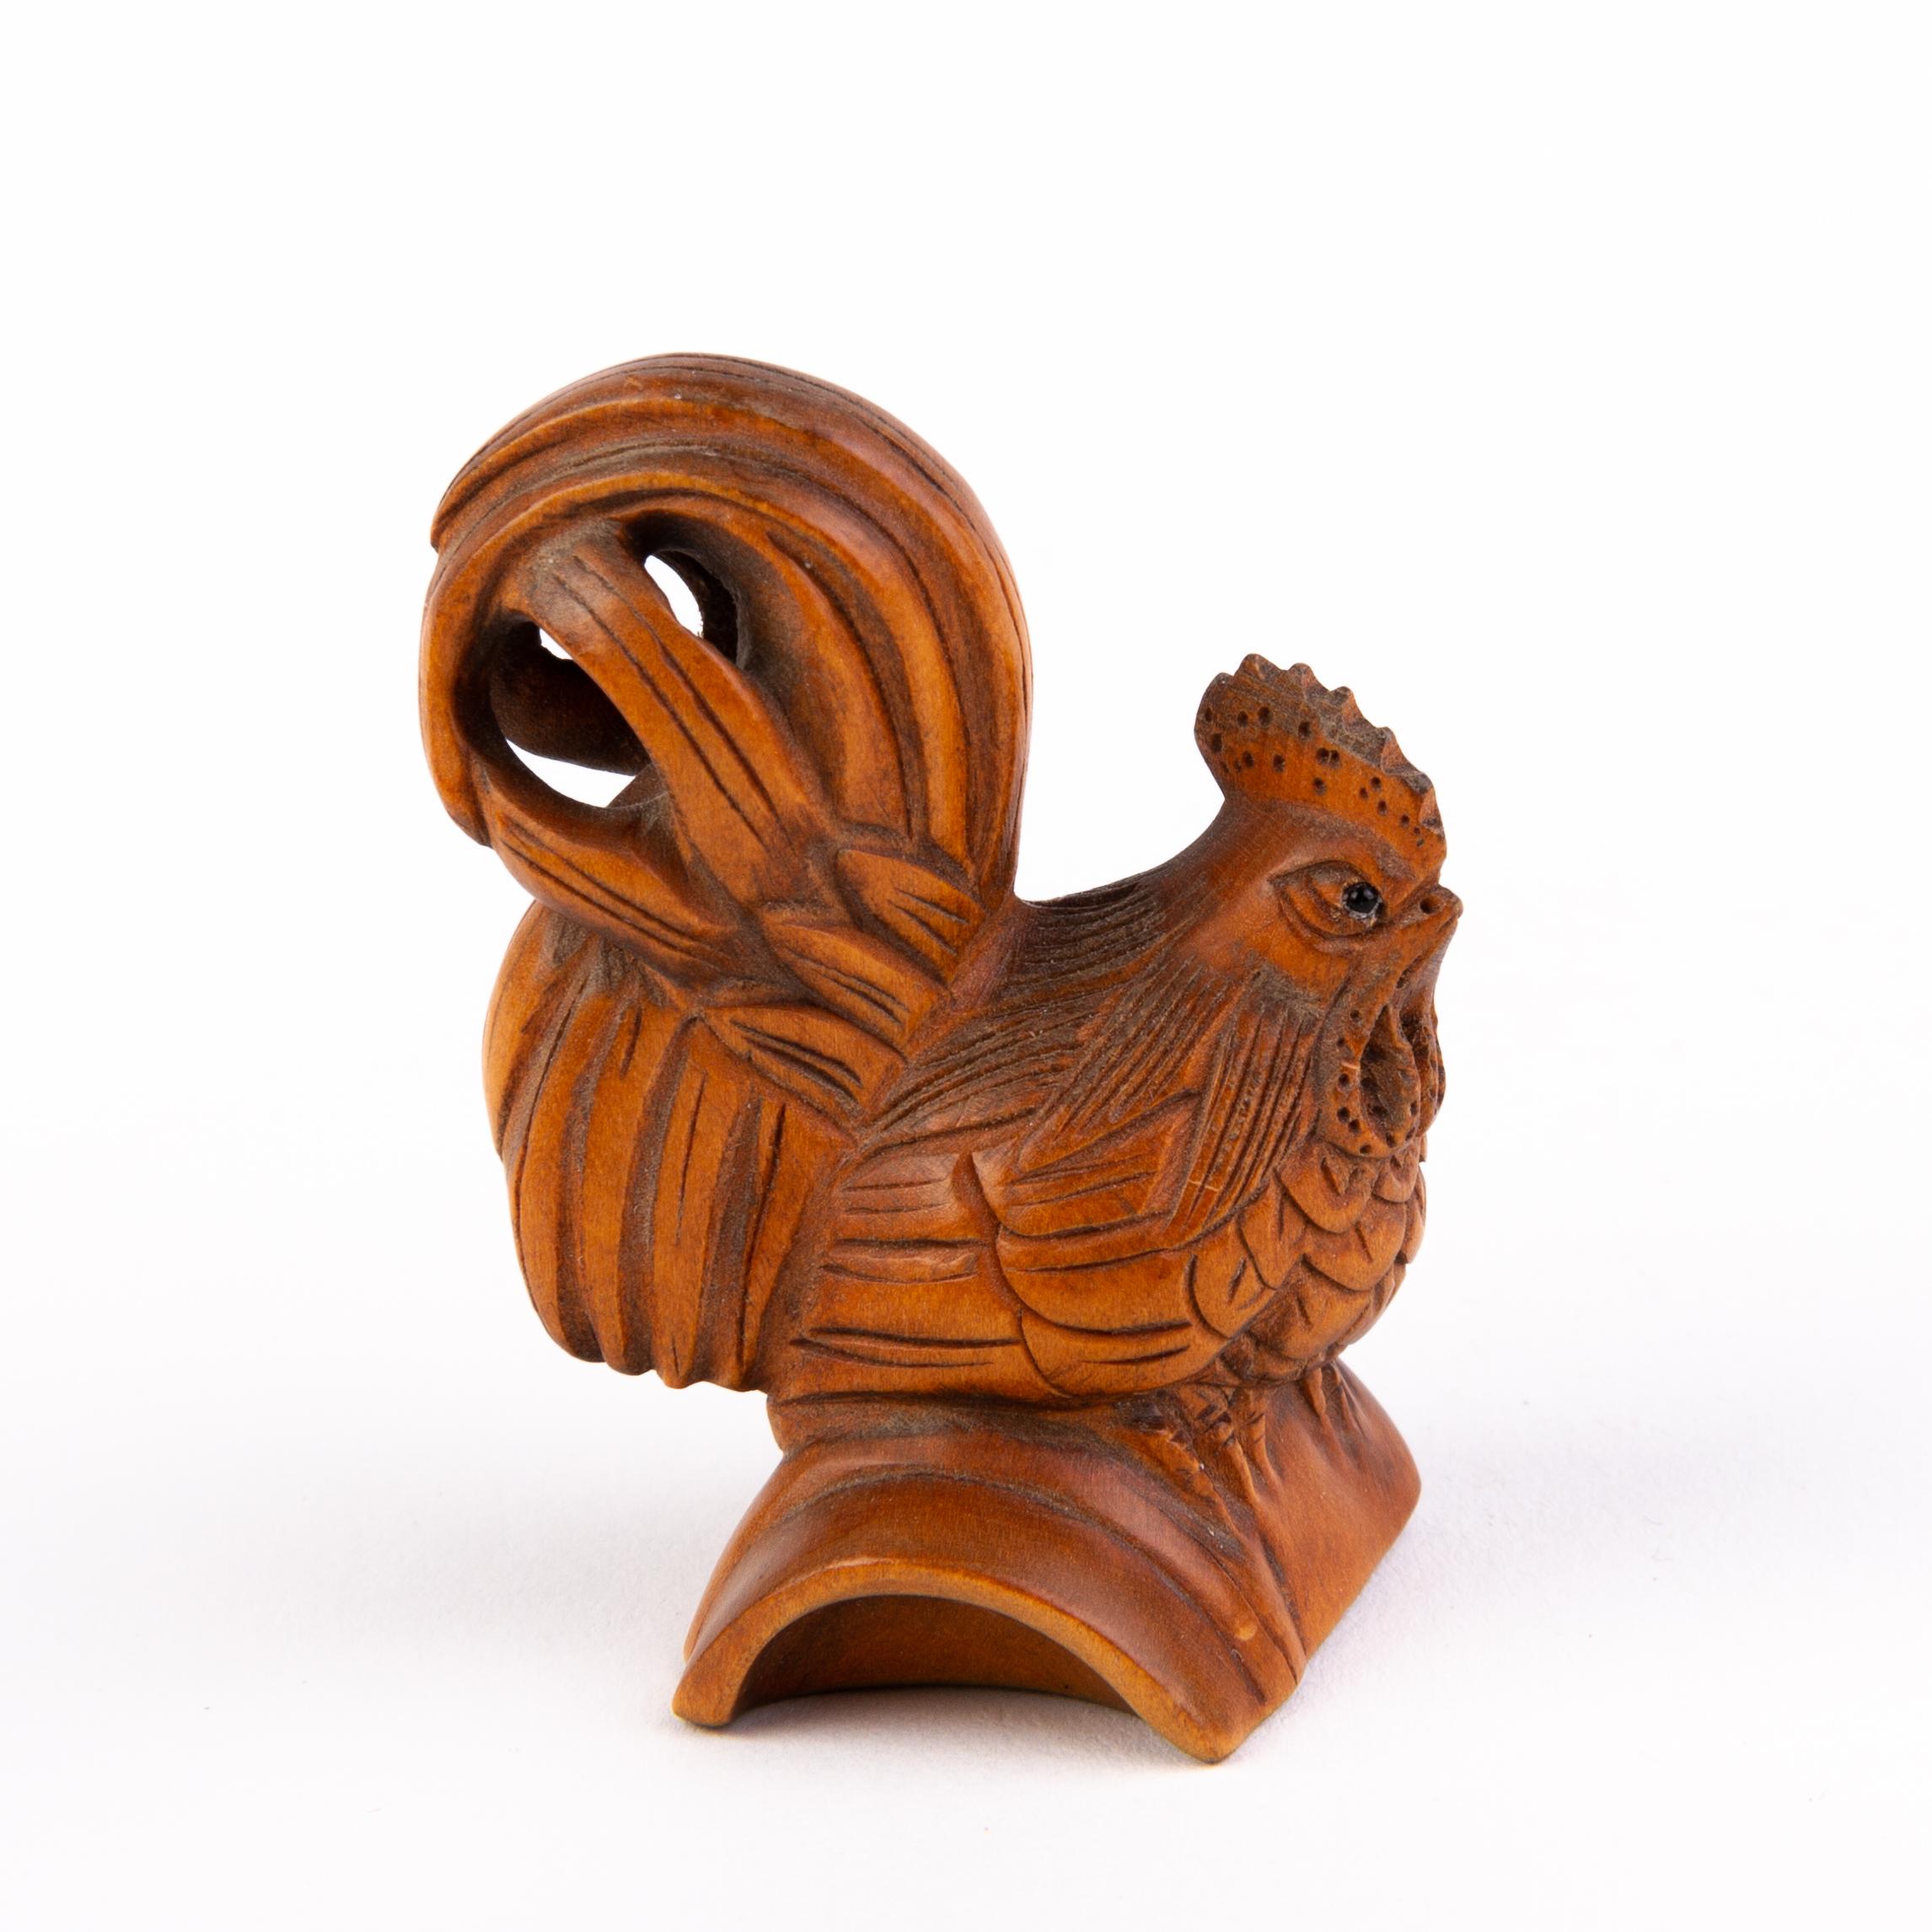 In good condition
From a private collection
Free international shipping
Signed Japanese Boxwood Netsuke Inro of a Rooster 